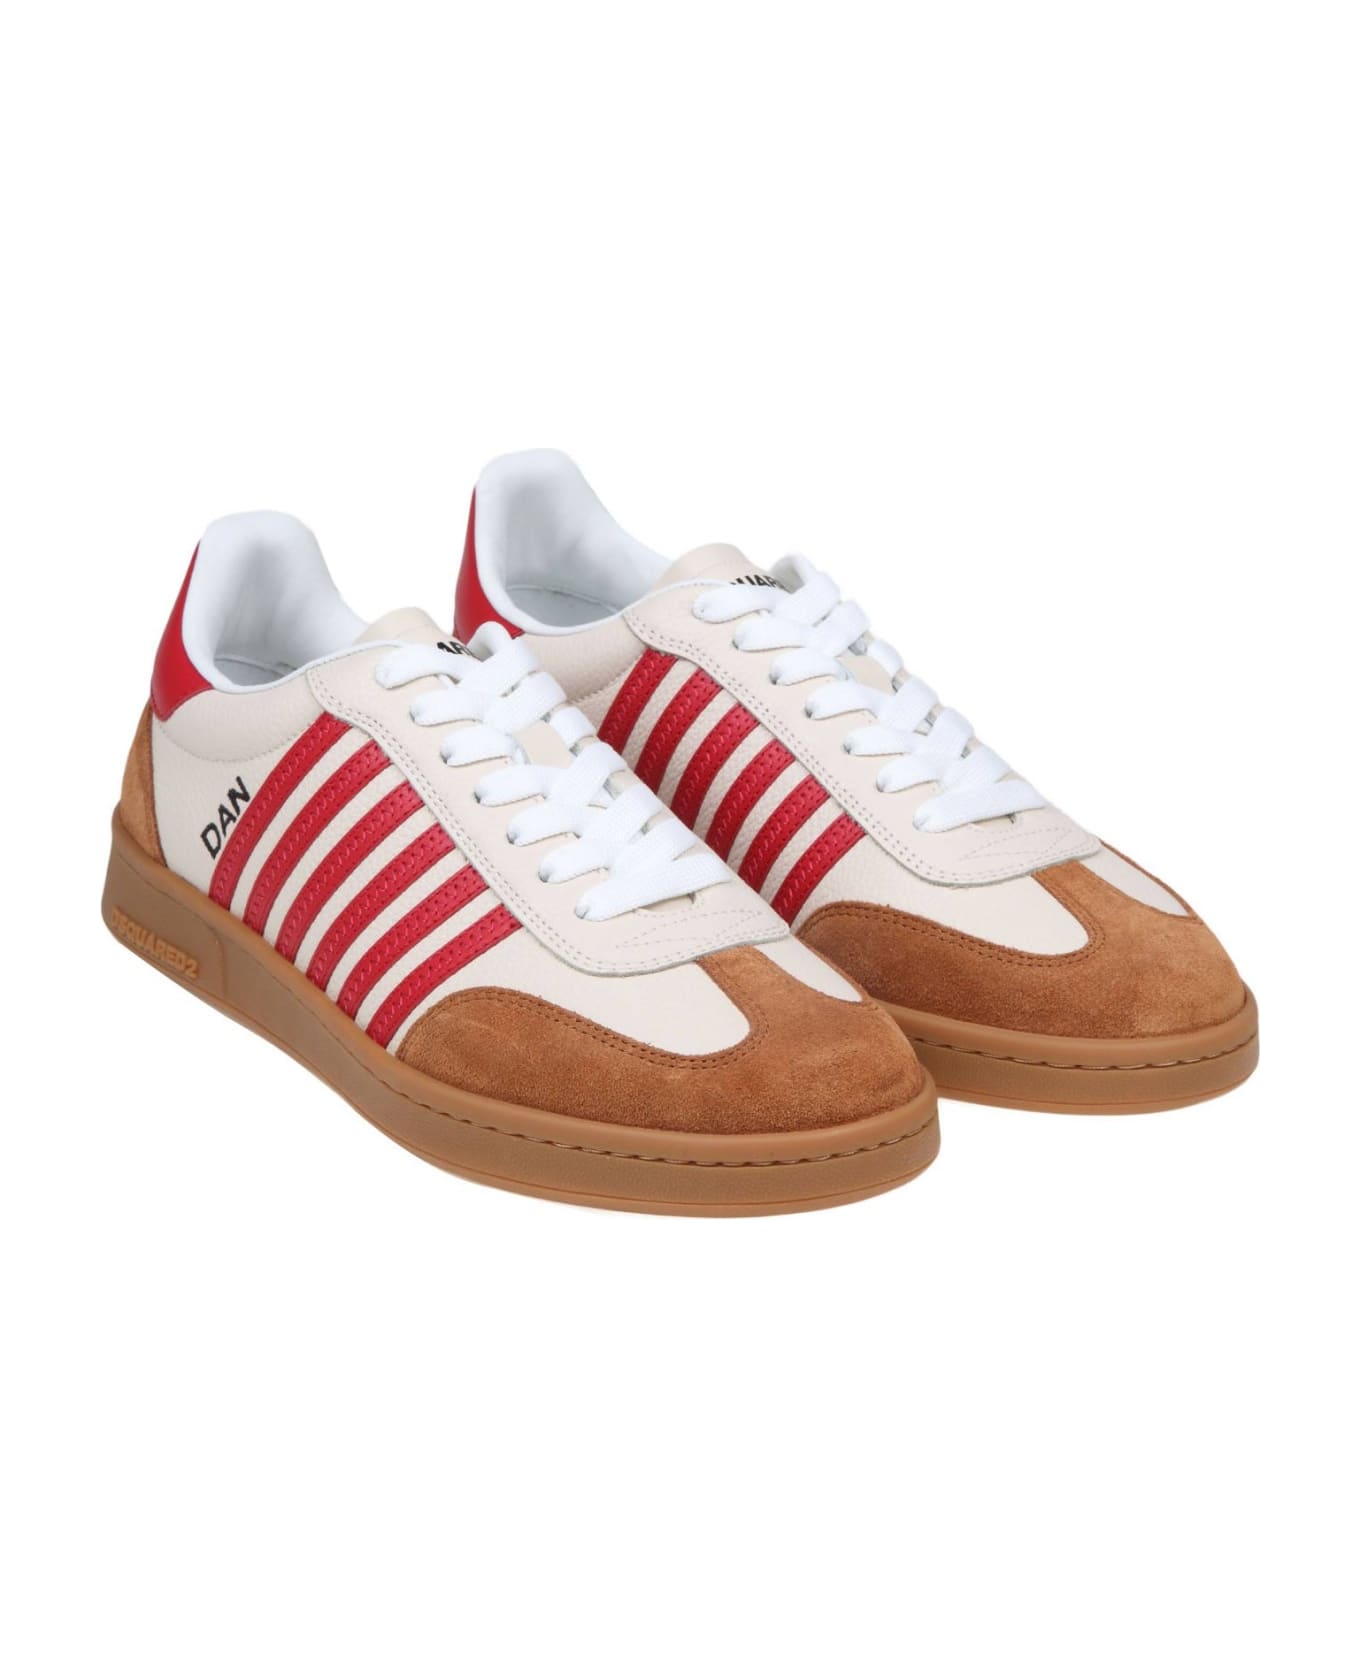 Dsquared2 Boxer Sneakers In White/red Leather And Suede - White/Red